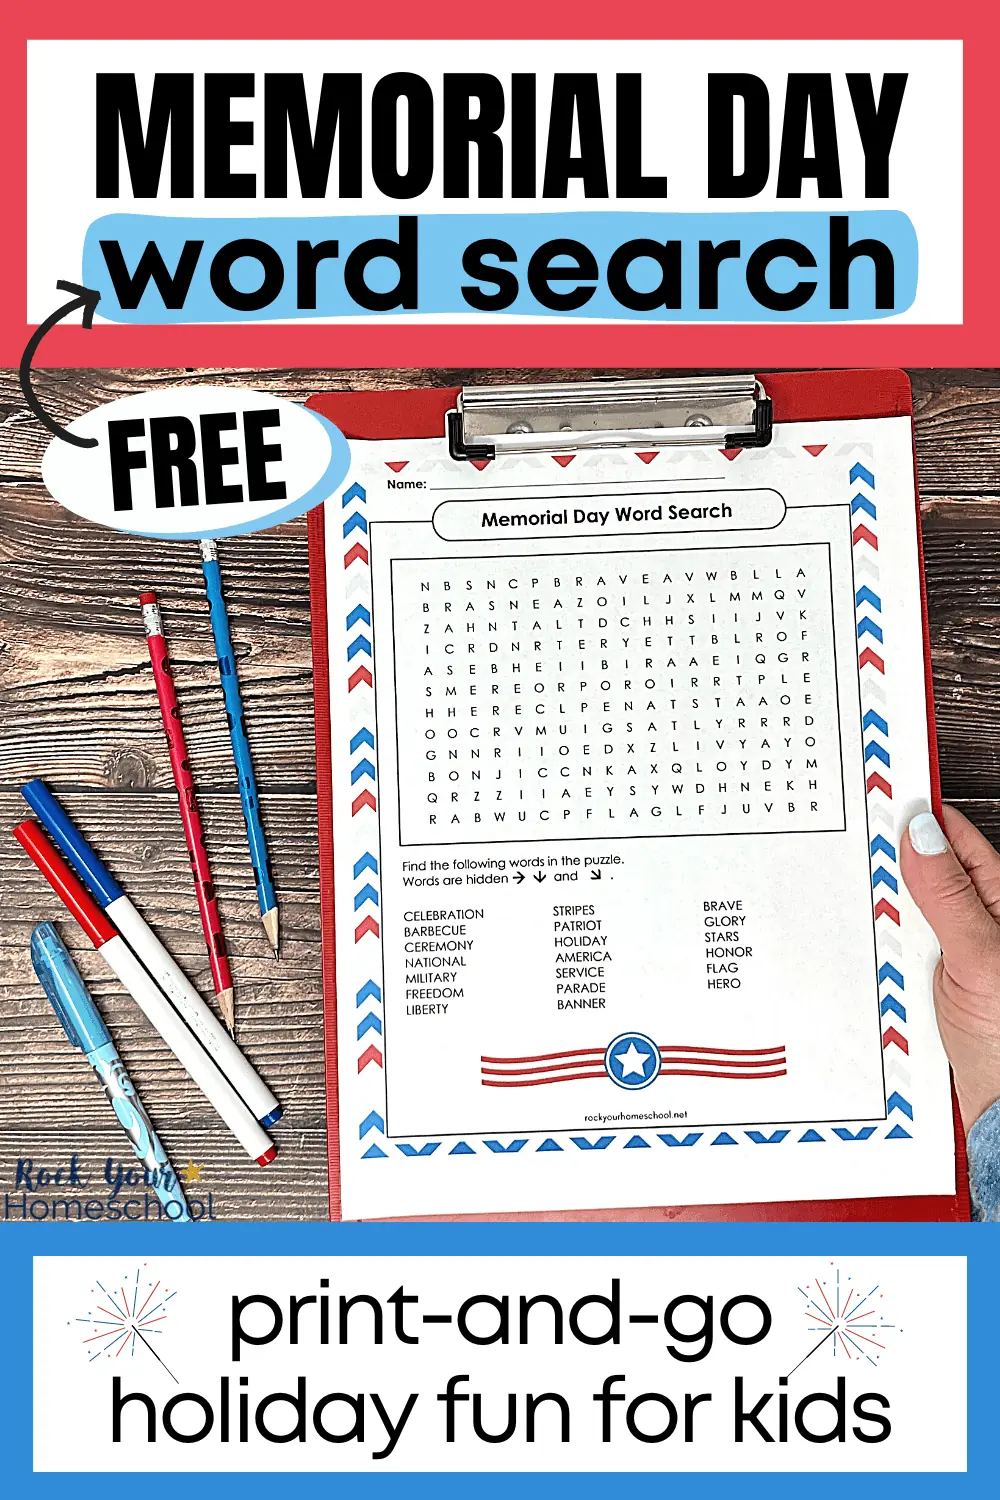 Memorial Day Word Search for a Fun Holiday Activity for Kids (Free)